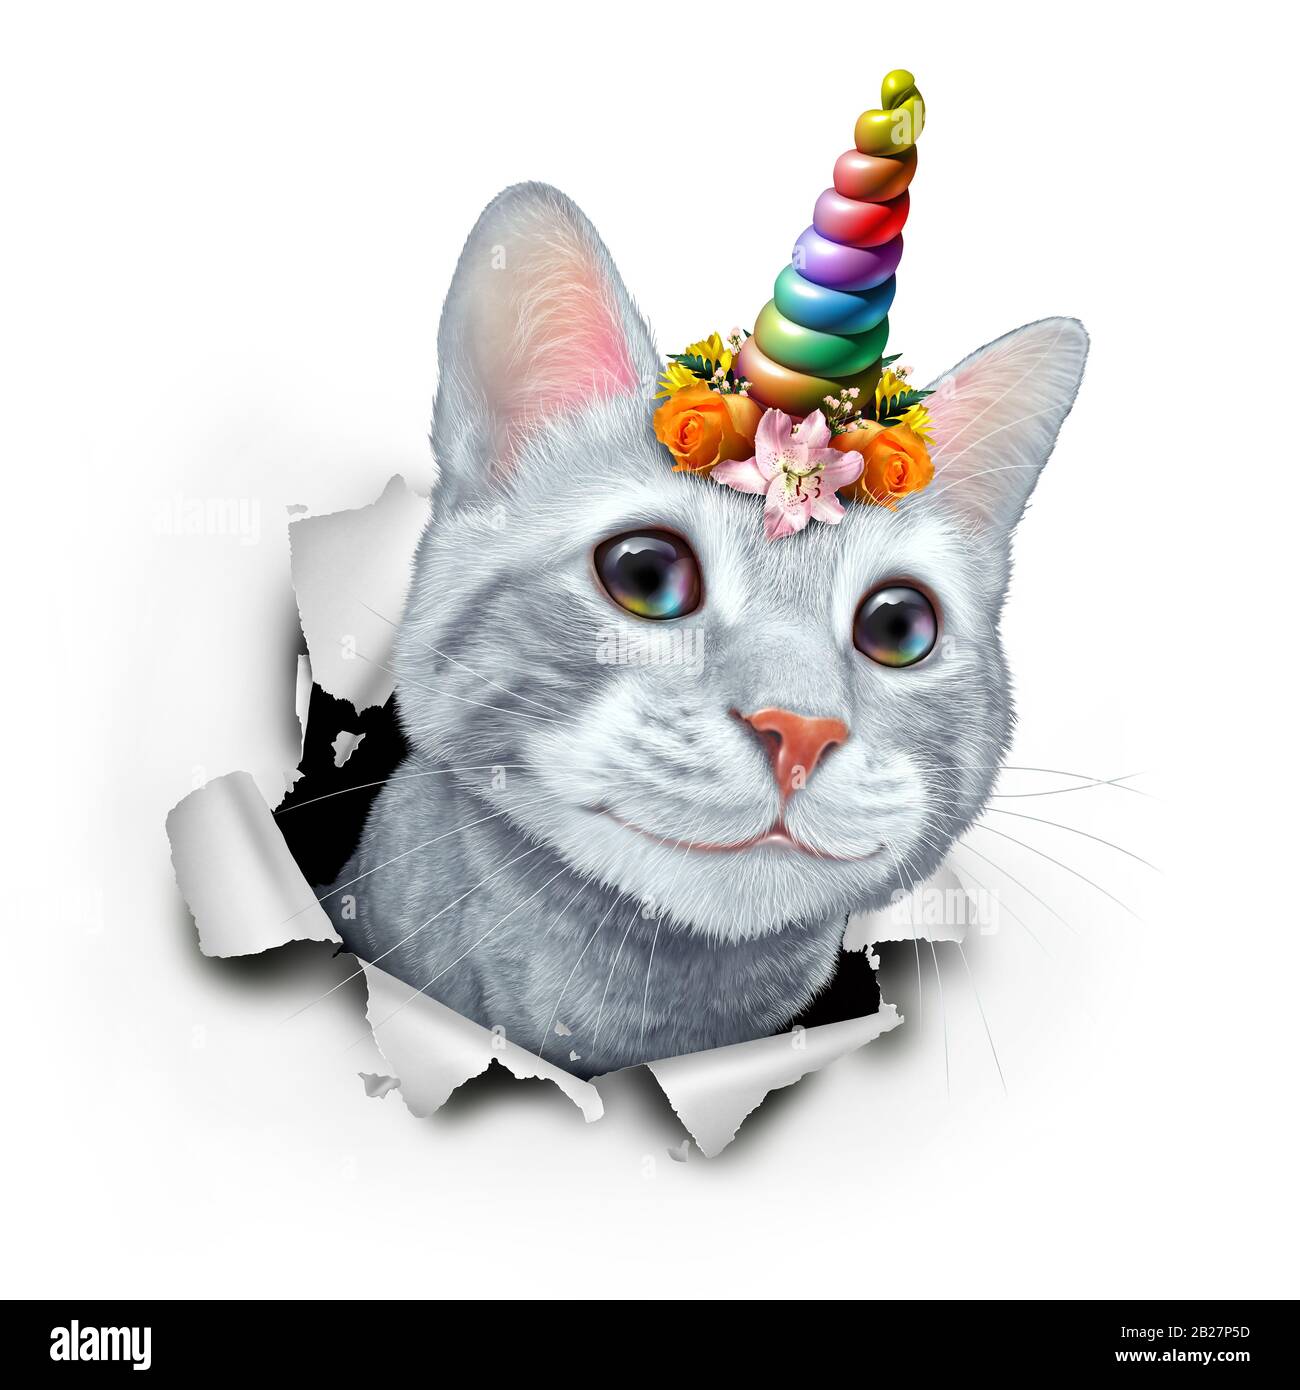 Kitty unicorn as a cute kitten with a fairytale magical horn rainbow cat with a wreath of flowers with 3D illustration elements. Stock Photo